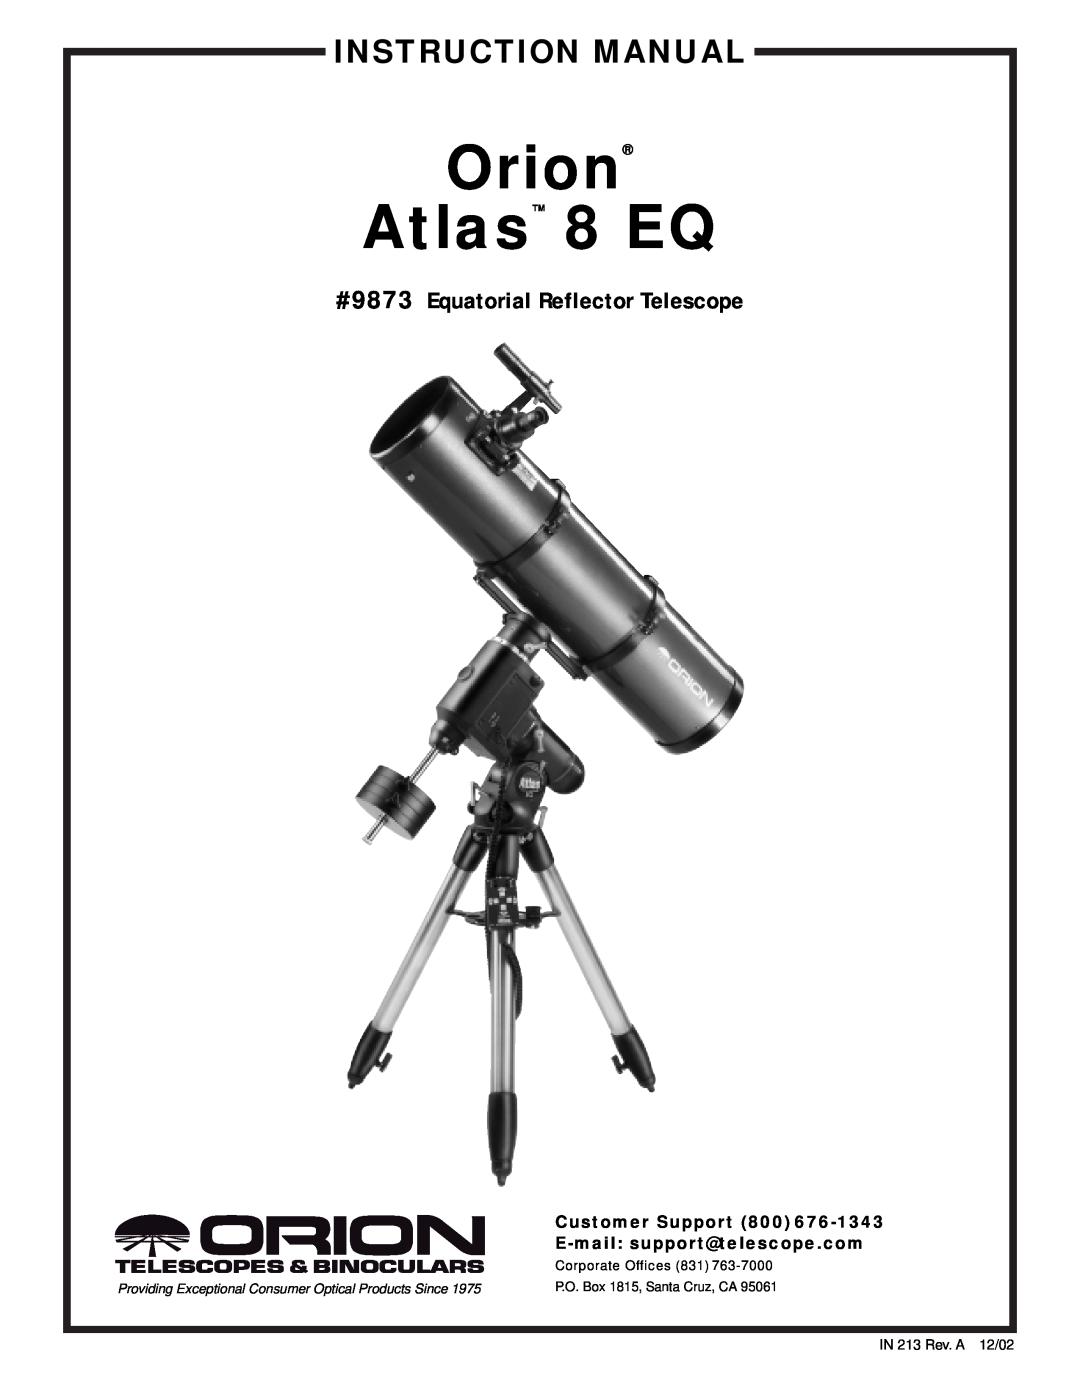 Orion instruction manual #9873 Equatorial Reflector Telescope, Orion Atlas 8 EQ, Customer Support, Corporate Offices 